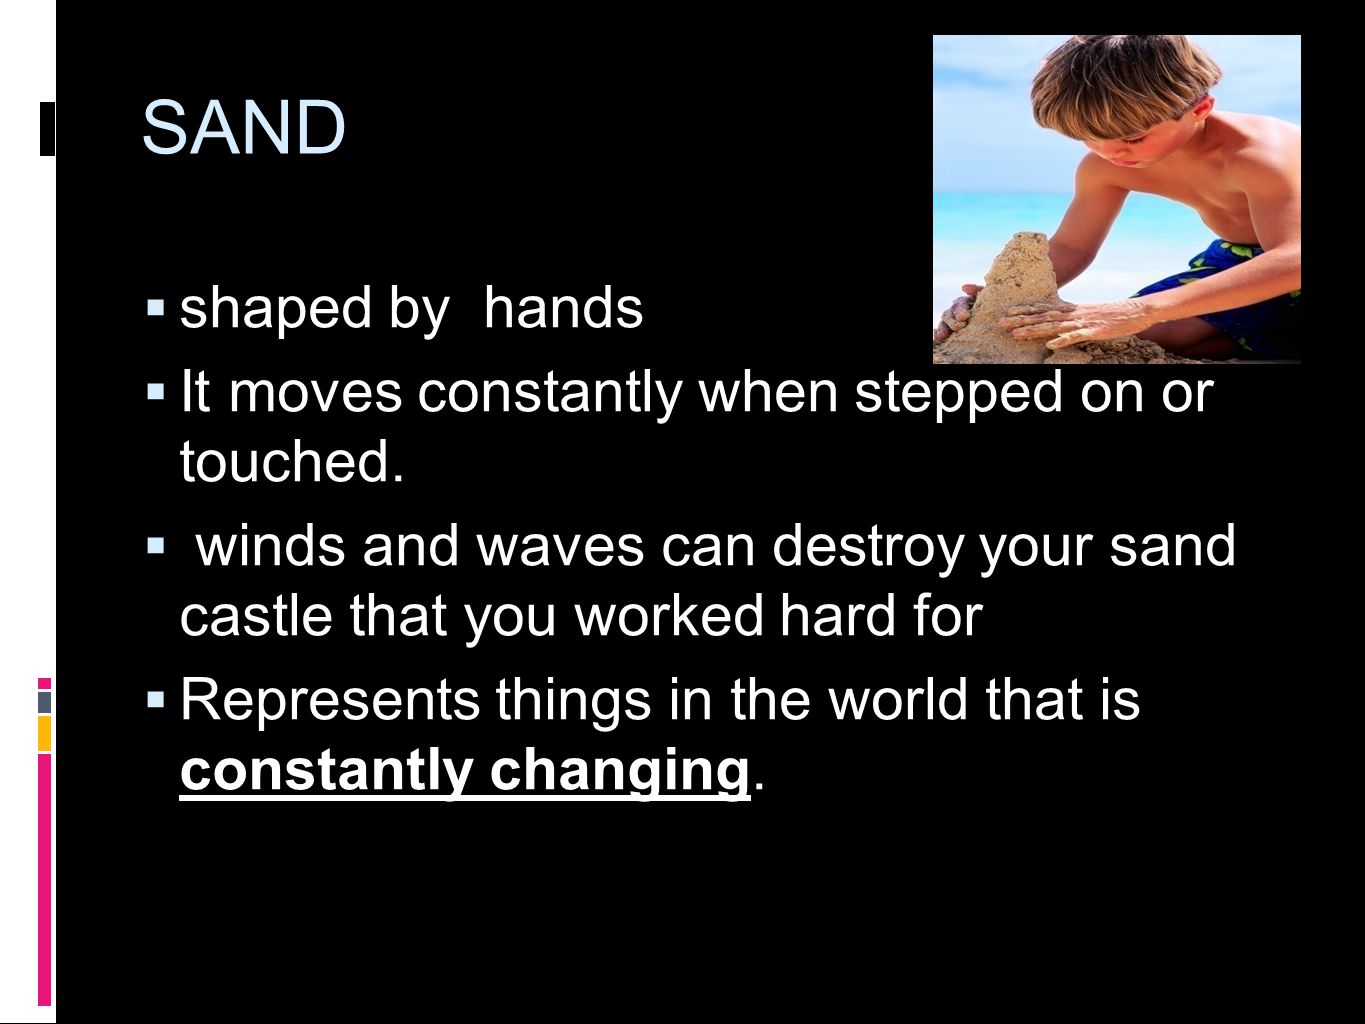  shaped by hands  It moves constantly when stepped on or touched.